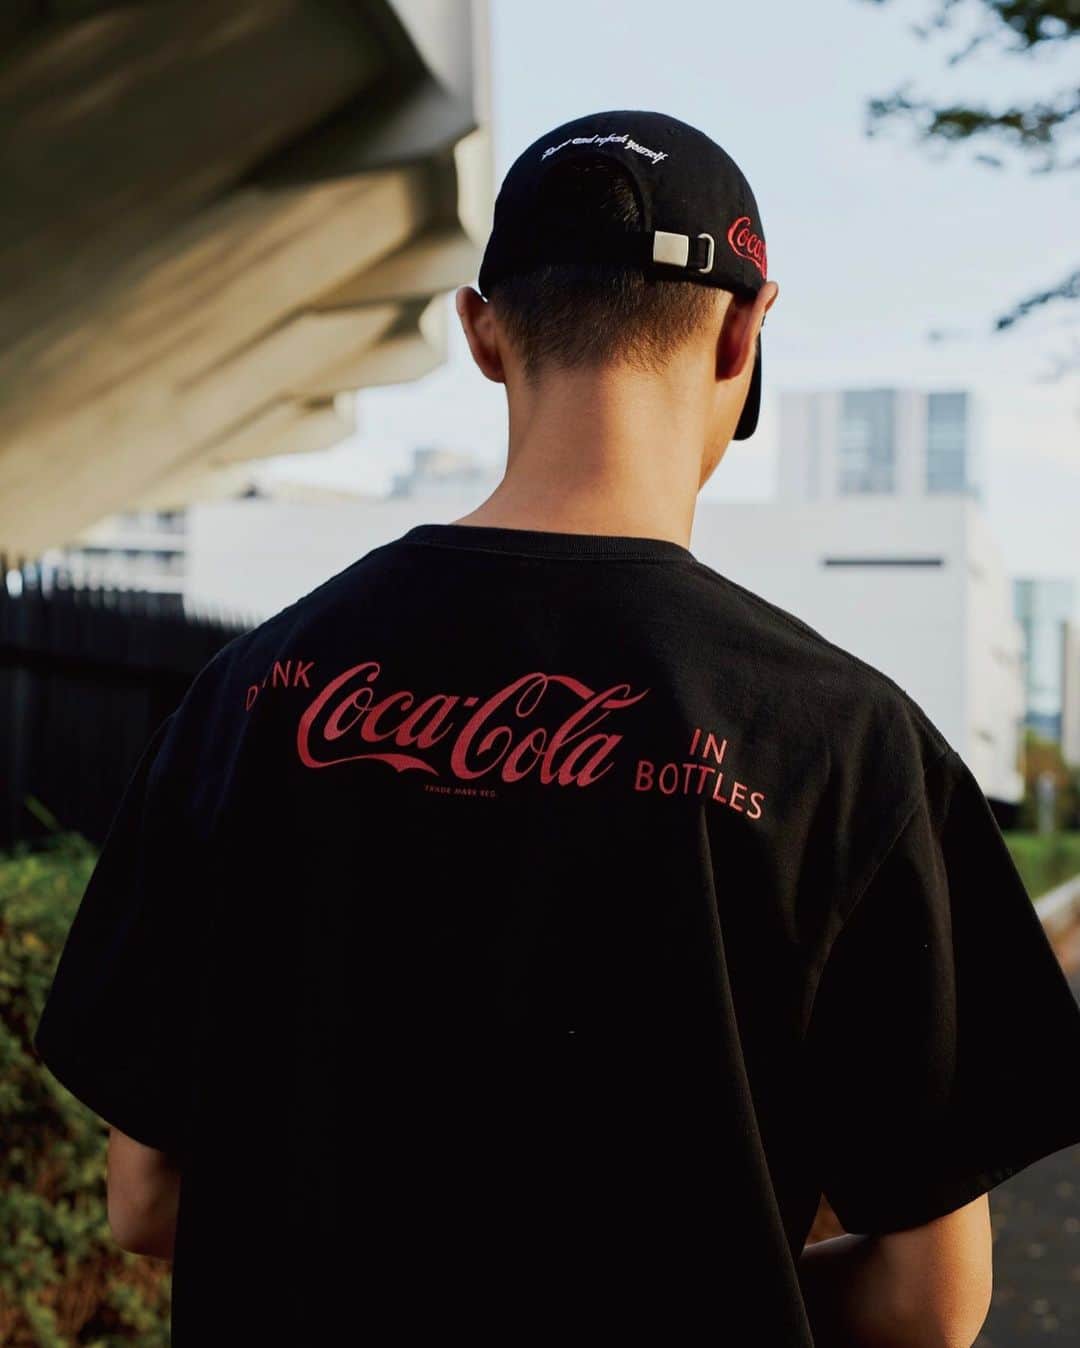 アトモスさんのインスタグラム写真 - (アトモスInstagram)「. 11/14(SAT)より、COCA-COLA x atmos20AW CAPUSULE COLLECTIONが登場。 毎シーズン定番の新作アパレルは、COCA-COLAロゴにフューチャーしたストリートライクなデザインのコレクションで、ジャケットからボトムス、キャップに⾄るまで幅広いラインナップで展開。そしてatmosでも⼈気の⾼いMAISON MIHARA YASUHIRO、オリジナルソールシリーズにatmosが別注を⼿がけた「Maison MIHARA YASUHIRO “COCA-COLA x atmos OG SOLE SNEAKER”」も同時リリース。 今作は⼿でこねた樹脂粘⼟をバルカナイズド製法で⼿掛け、その型を3DスキャンしたEVA素材を⽤いて作製されている。ユニークなスニーカーの左右に、カタカナと英語でCOCA-COLAのロゴプリントを施し、スペシャルなデザインの⼀⾜に仕上げた。COCA-COLAカラーでお馴染みのCOKE RED、定番のBLACKに加え、鮮やかなグラデーションが特徴のマルチカラーの3⾊展開でのリリースとなります。 本商品は2020年11⽉14⽇より、atmos OnlineShop、atmos各店にて販売致します。 ©︎2020 The Coca-Cola Company. All rights reserved. . From 11/14 (SAT), COCA-COLA x atmos20AW CAPUSULE COLLECTION will be released. The new apparel, which is a staple of each season, is a collection of street-like designs featuring the COCA-COLA logo, and is available in a wide lineup from jackets to bottoms and caps. Also, MAISON MIHARA YASUHIRO, who has a high level of humanity at atmos, and "Maison MIHARA YASUHIRO" COCA-COLA x atmos OG SOLE SNEAKER "", which atmos made a special order for the original sole series, will be released at the same time. "MAISON MIHARAYASUHIRO" started as a shoe brand in 1997. This work is made using EVA material, which is made by applying a resin sticky material kneaded by hand using a vulcanized manufacturing method and 3D scanning the mold.The COCA-COLA logo is printed in katakana and English on the left and right sides of the unique sneakers to create a specially designed sneaker. In addition to COKE RED, which is familiar with COCA-COLA colors, and the classic BLACK, it will be released in multi-colored three-color development featuring vivid gradation. For MIHARAYASUHIRO sneaker fans and those who like COCA-COLA, of course, it is finished in a special specification that colors the body. From November 14, 2020, this products will be on sale at the atmos Online Shop and atmos stores. . #atmos #atmostokyo #atmosjapan #cocacola #maisonmiharayasuhiro #miharayasuhiro #cola #mihara #アトモス #コカコーラ #ミハラヤスヒロ」11月11日 16時54分 - atmos_japan